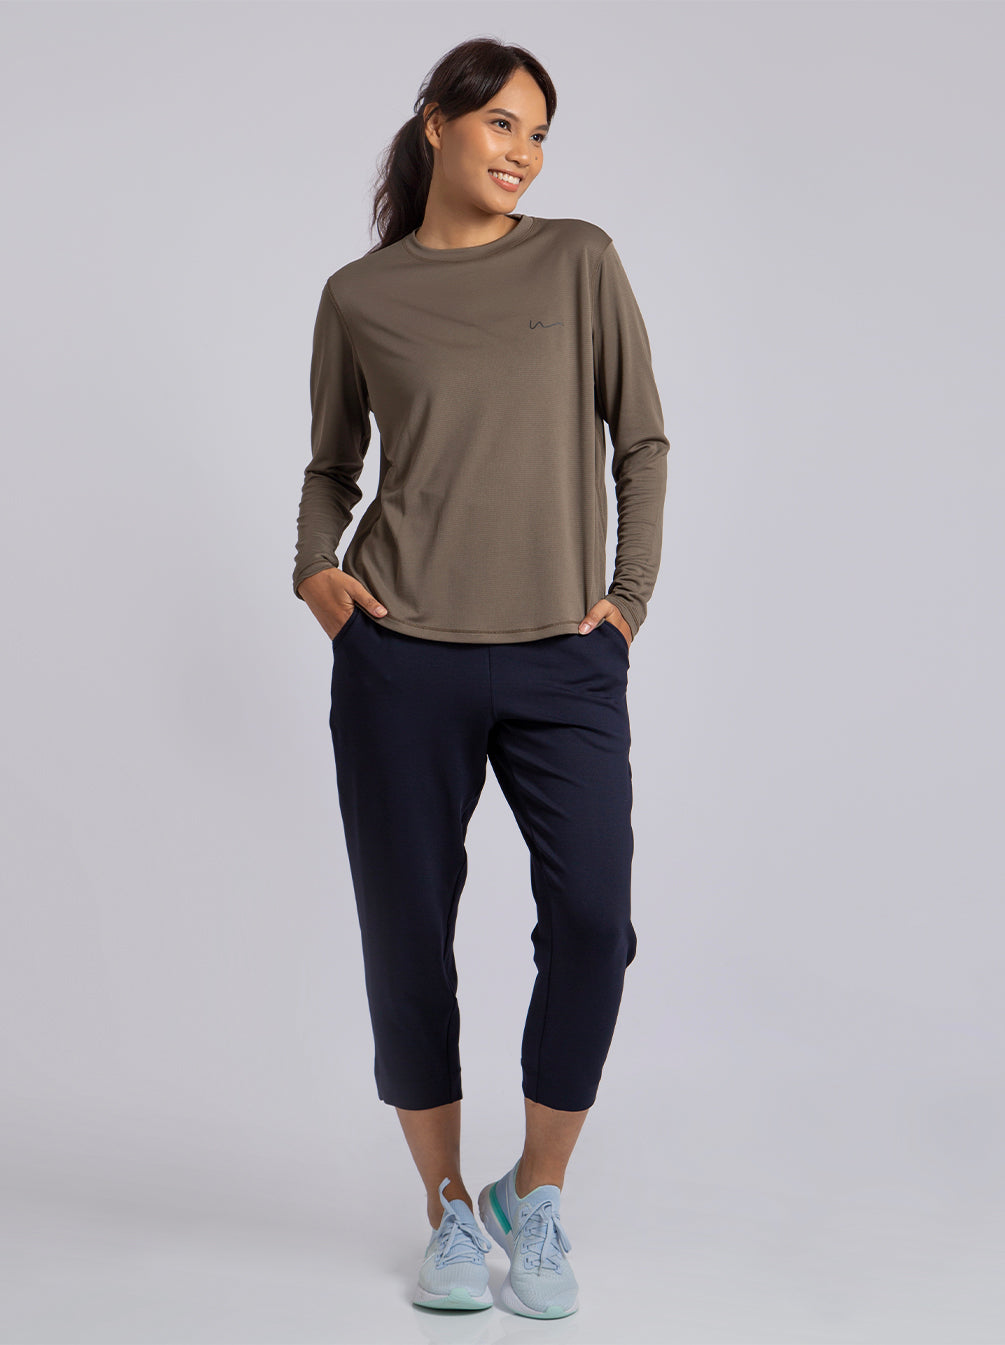 NAO SPORT TOP OLIVE